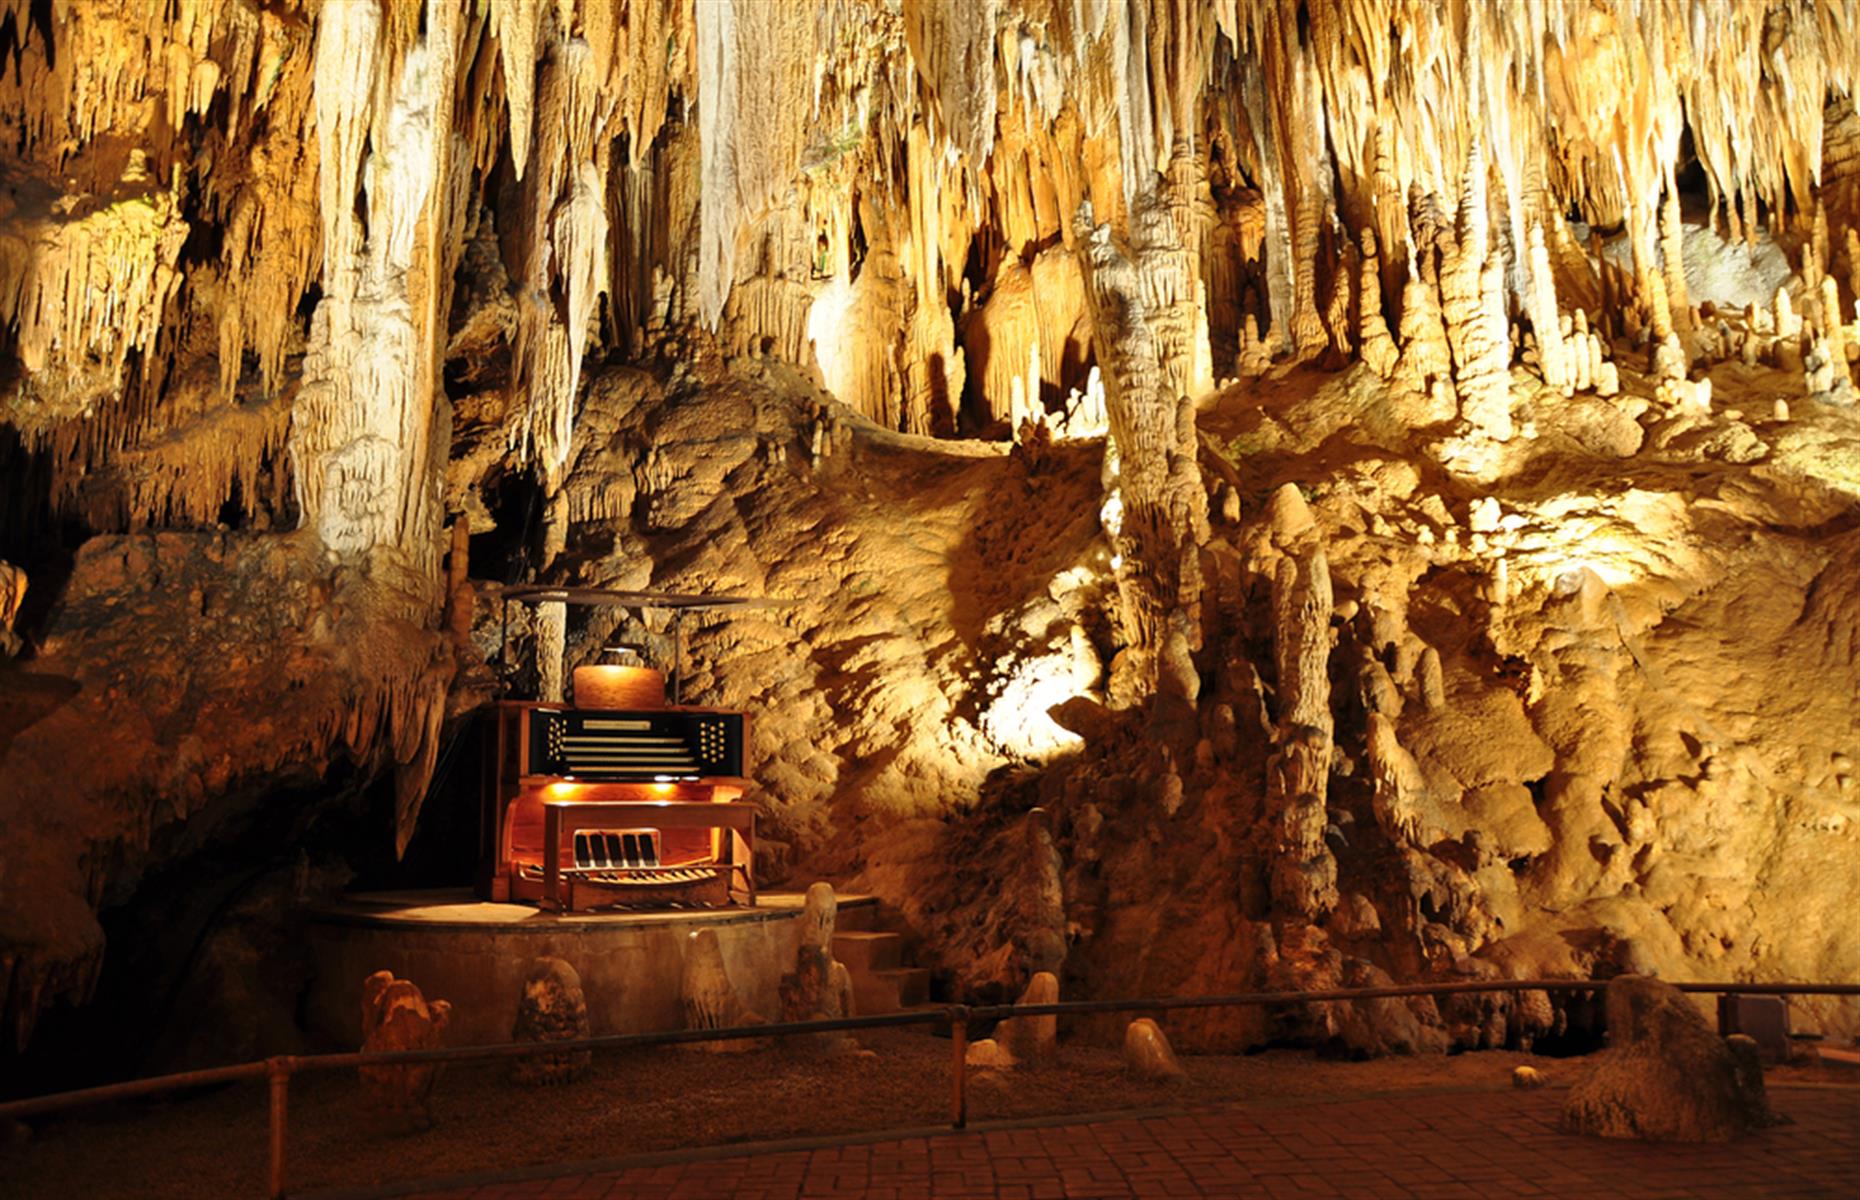 <p>While there are plenty of reasons to visit Luray – huge caverns, an incredible lake, ceilings 10-stories high – the main reason is to hear the world’s largest musical instrument. The Stalacpipe Organ makes music by gently tapping stalactites. Buy your tickets in advance.</p>